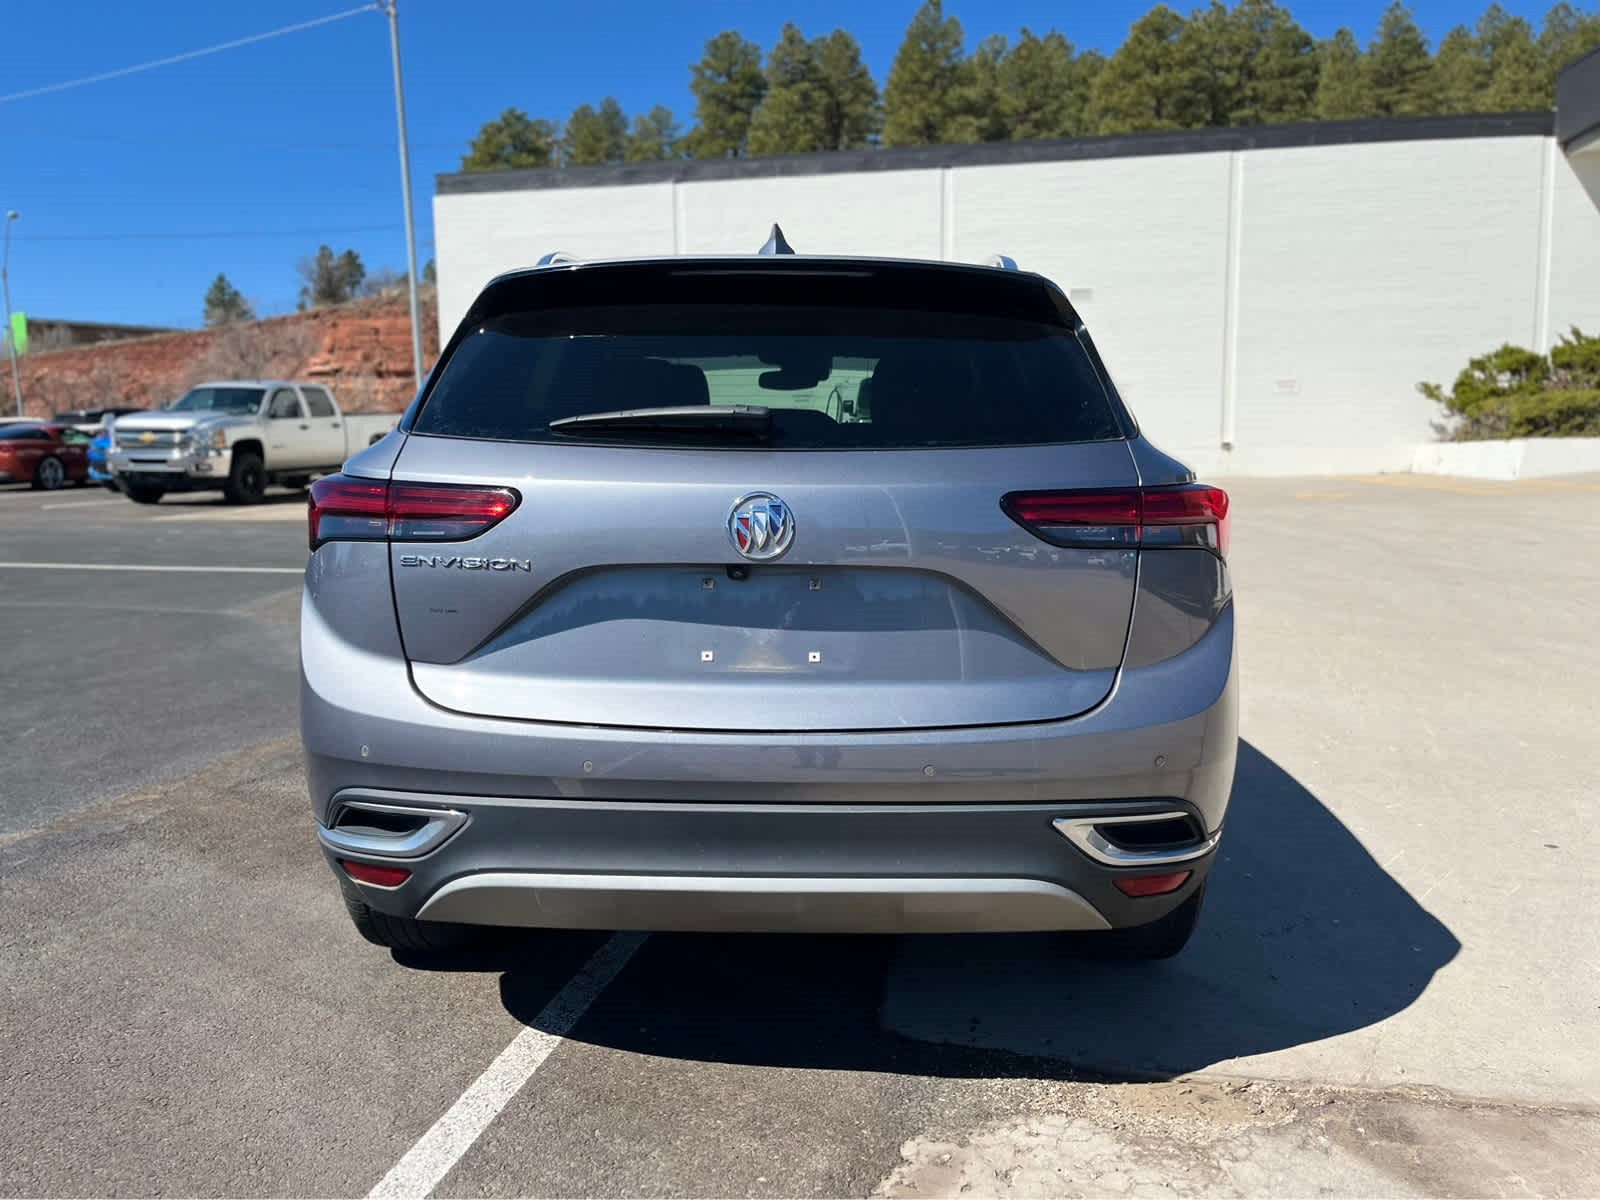 2021 Buick Envision FWD 4dr Preferred